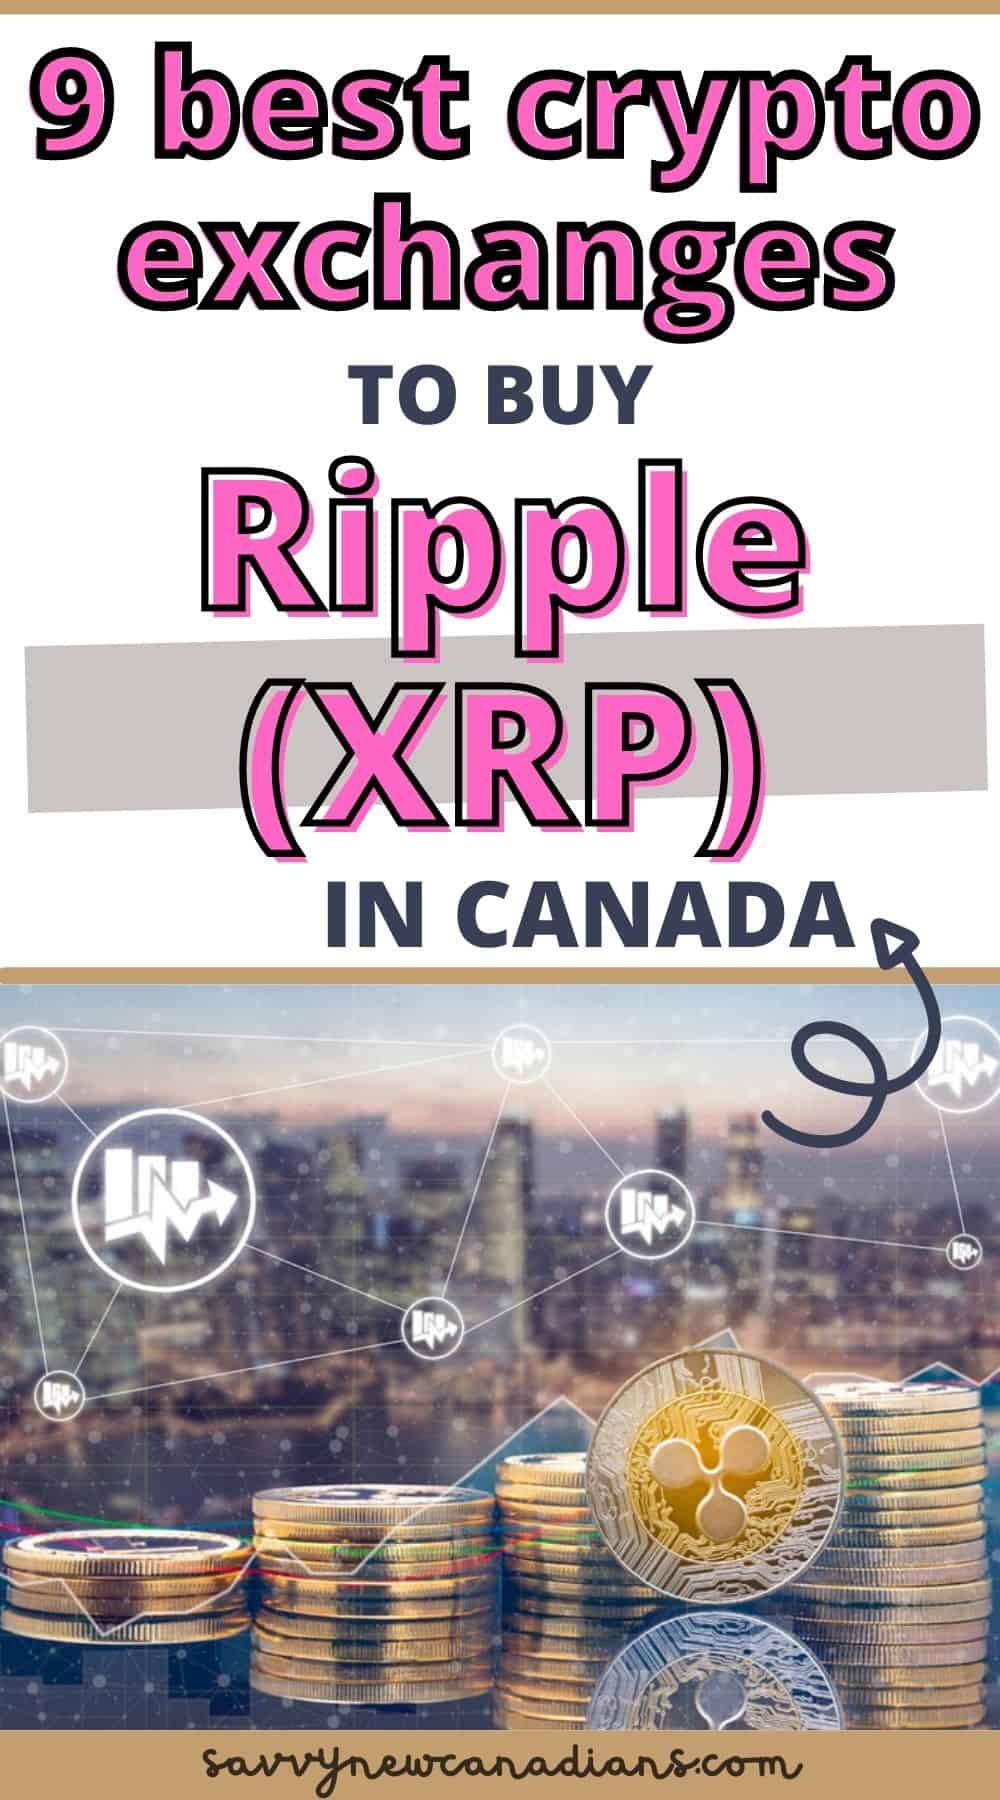 Where to buy ripple cryptocurrency in canada low cost cryptocurrency to buy